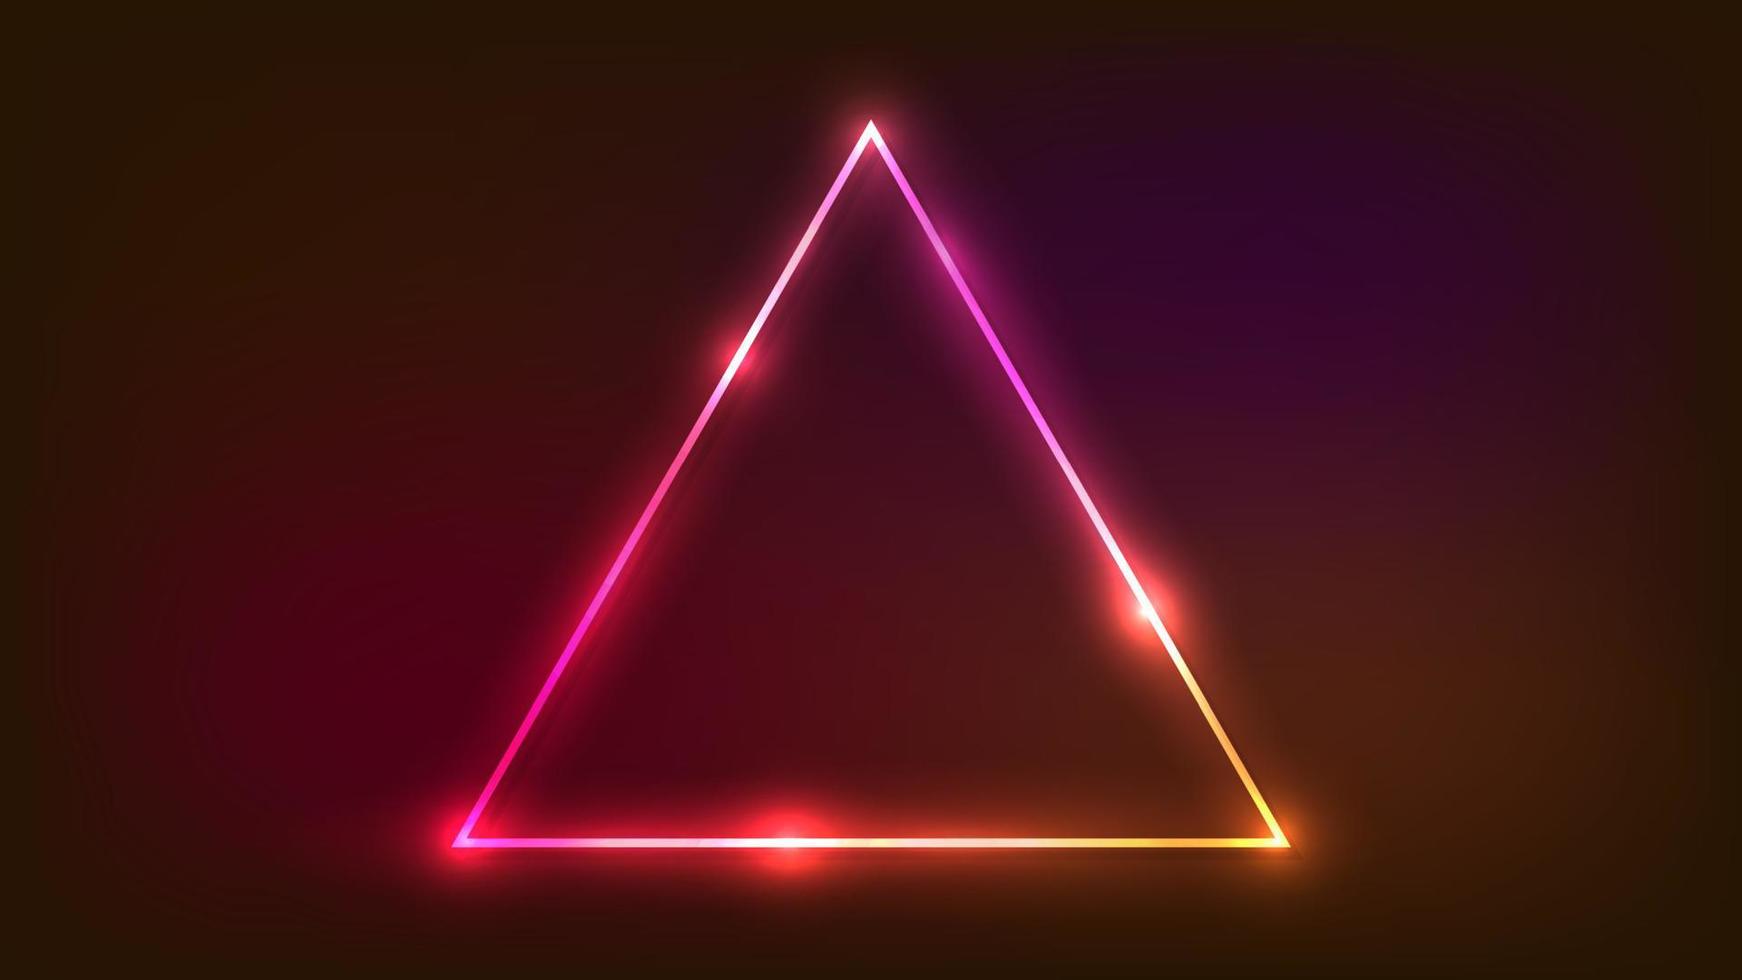 Neon triangular frame with shining effects on dark background. Empty glowing techno backdrop. Vector illustration.